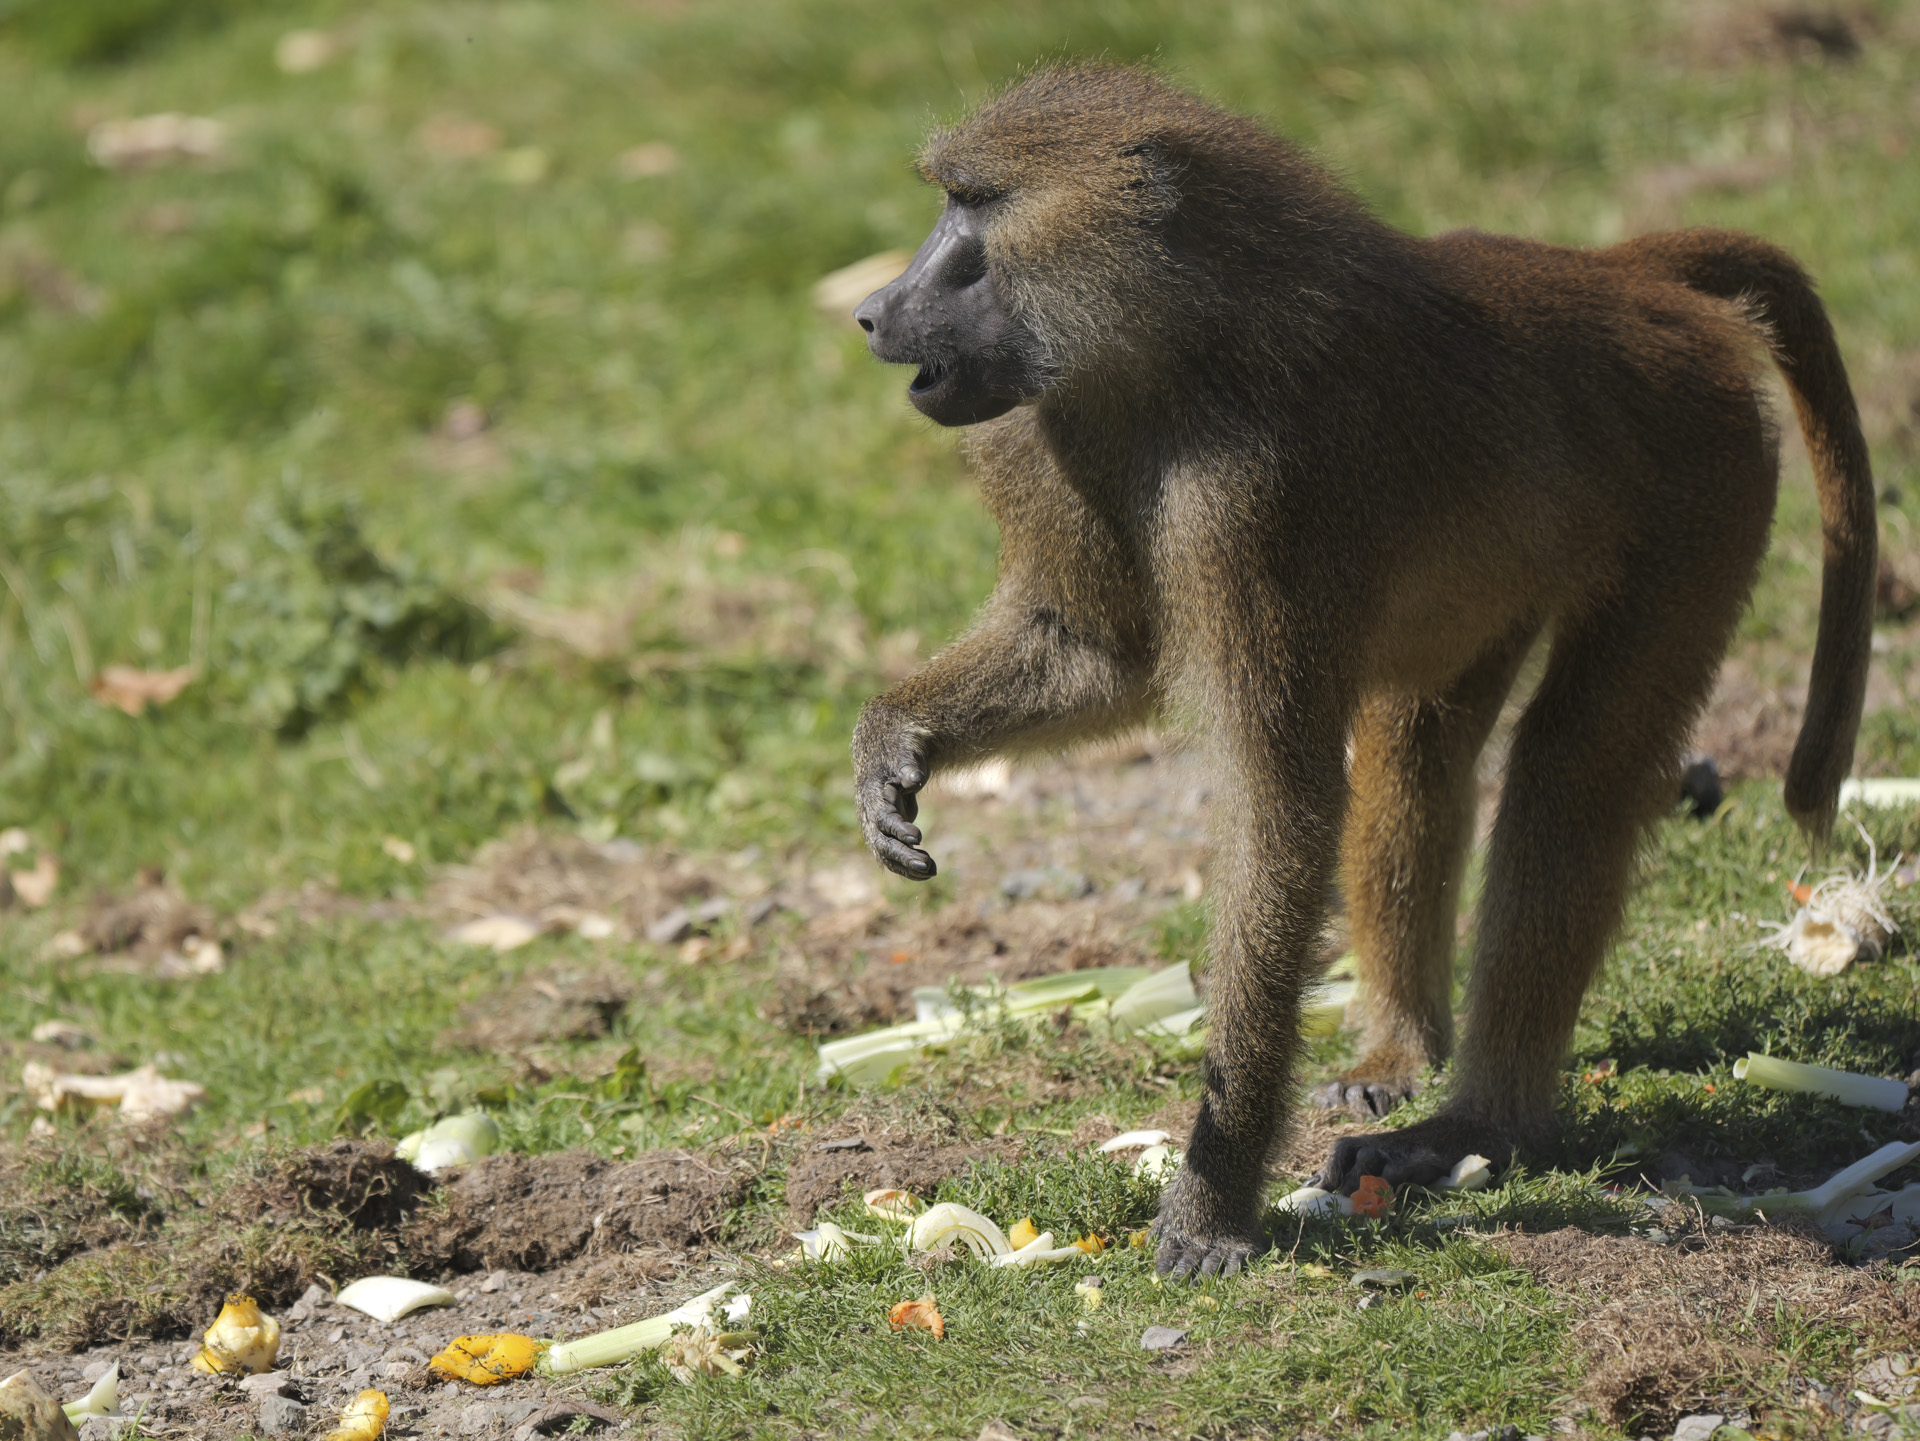 Baboon in bright sunlight, shot with Lumix G9 II and 200mm F2.8 lens